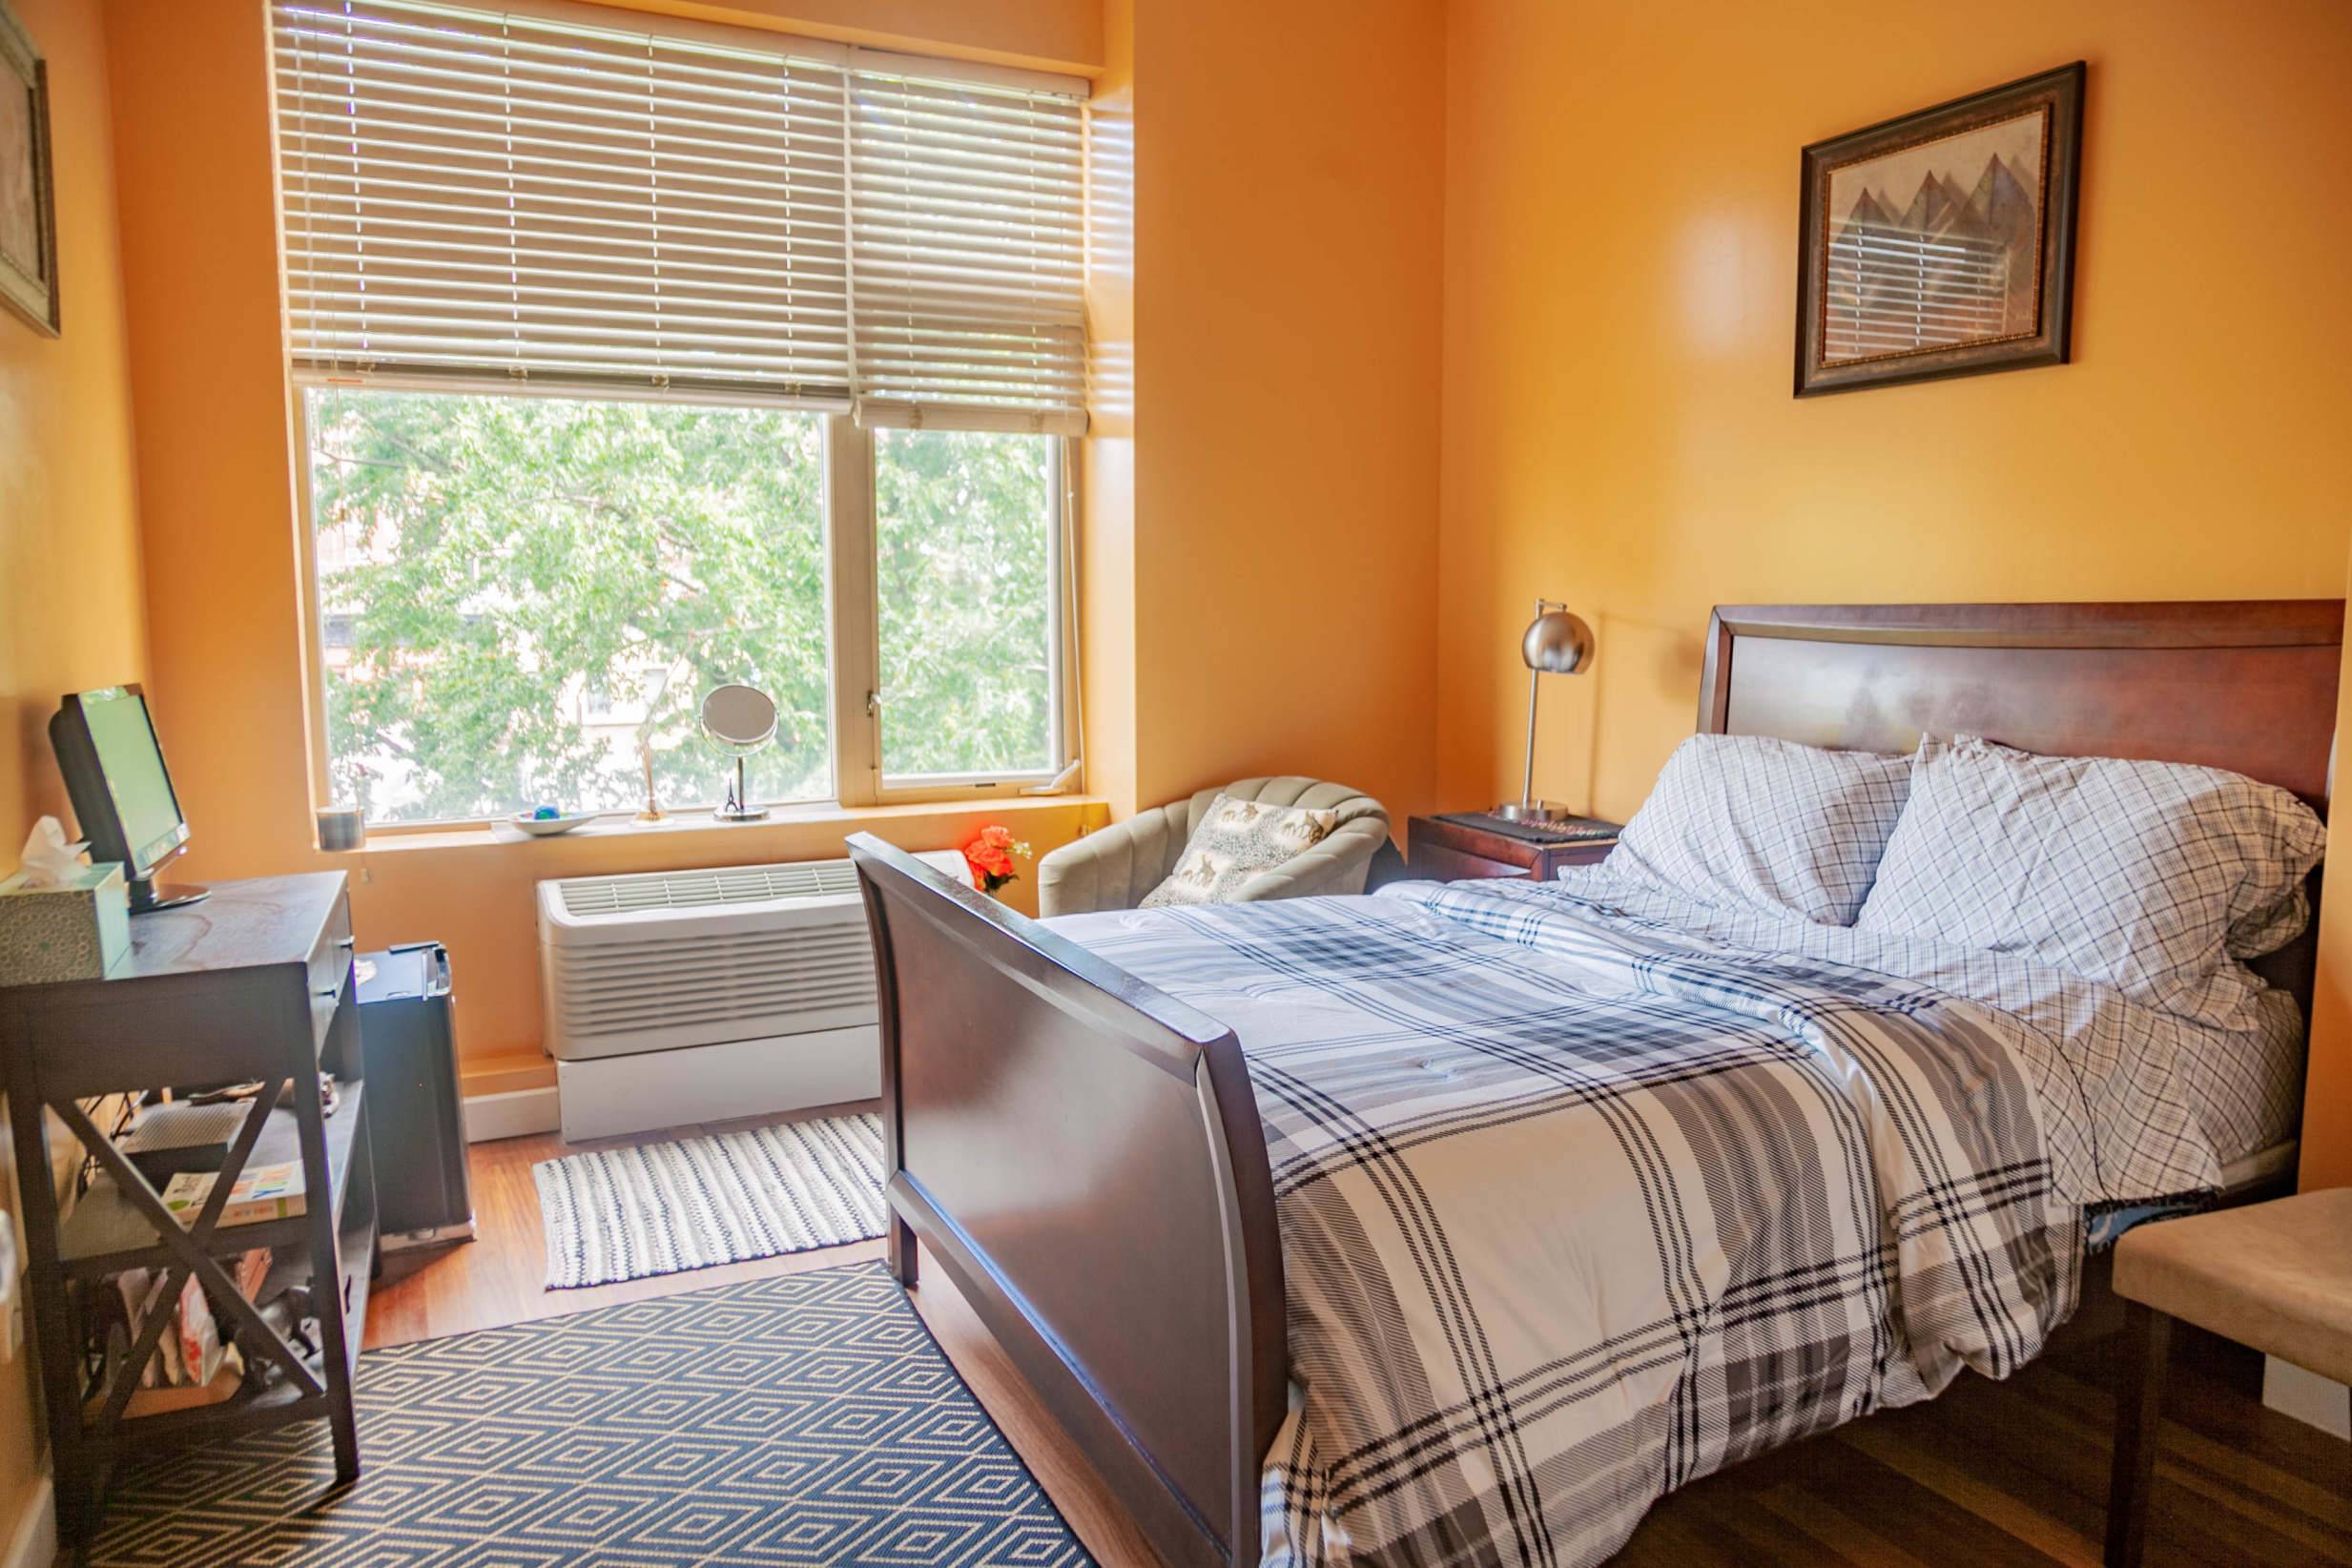 Amazing furnished one bedroom room rental available at the Mirada !